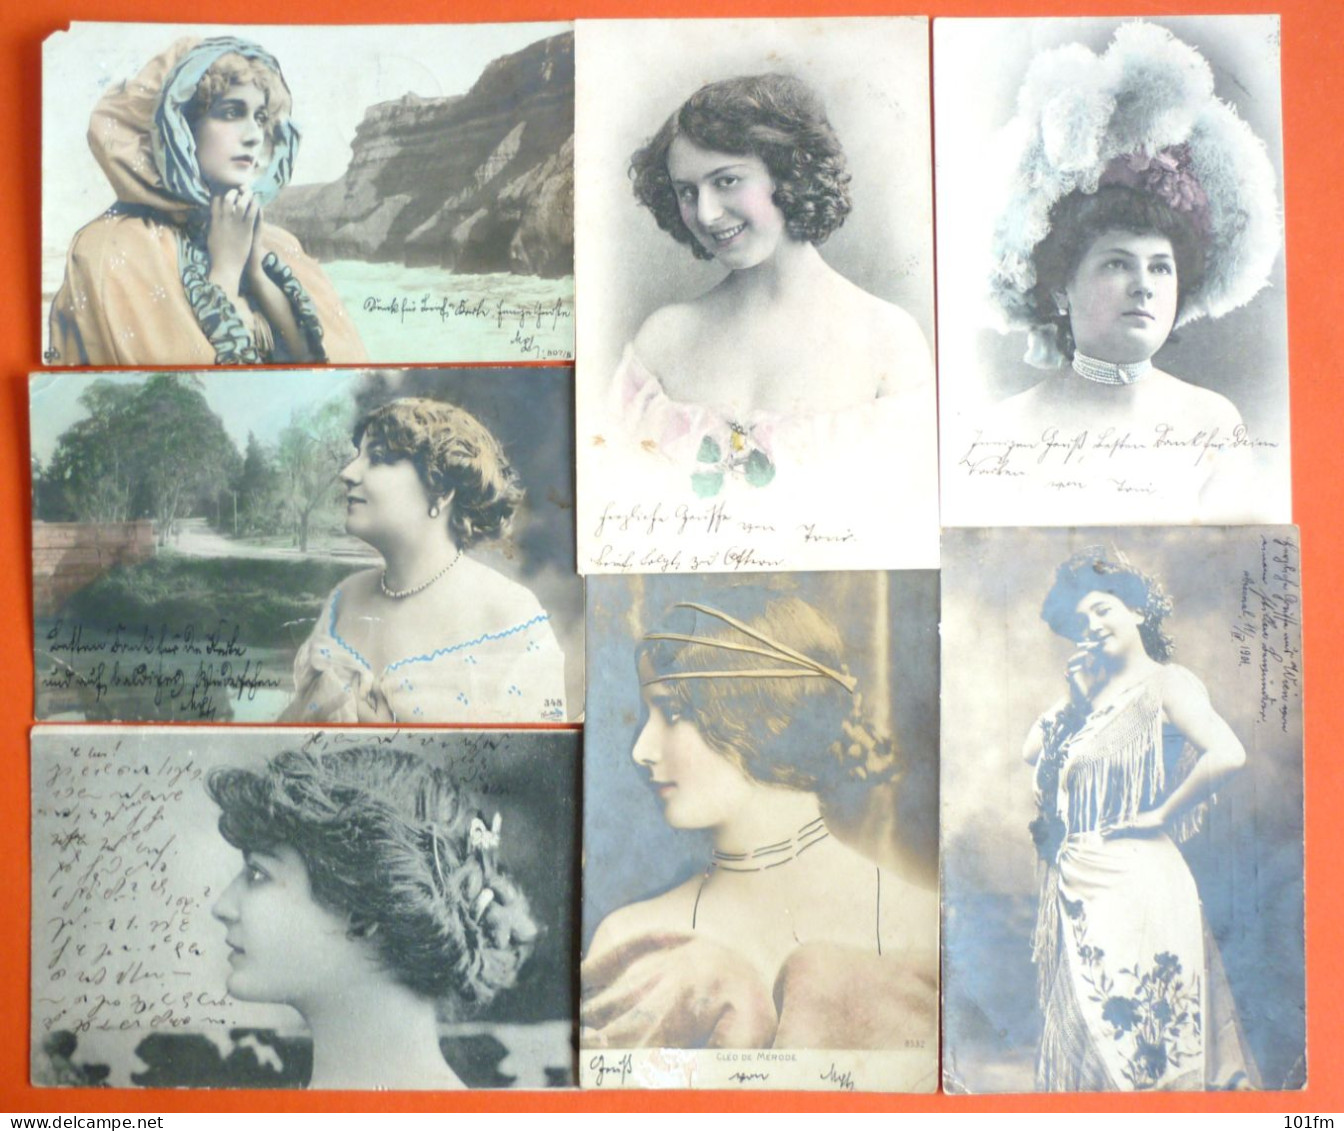 LOT 7 OLD POSTCARDS, BEAUTIFUL WOMAN, ALL USED WITH STAMPS, EXCELLENT CONDITION - Women